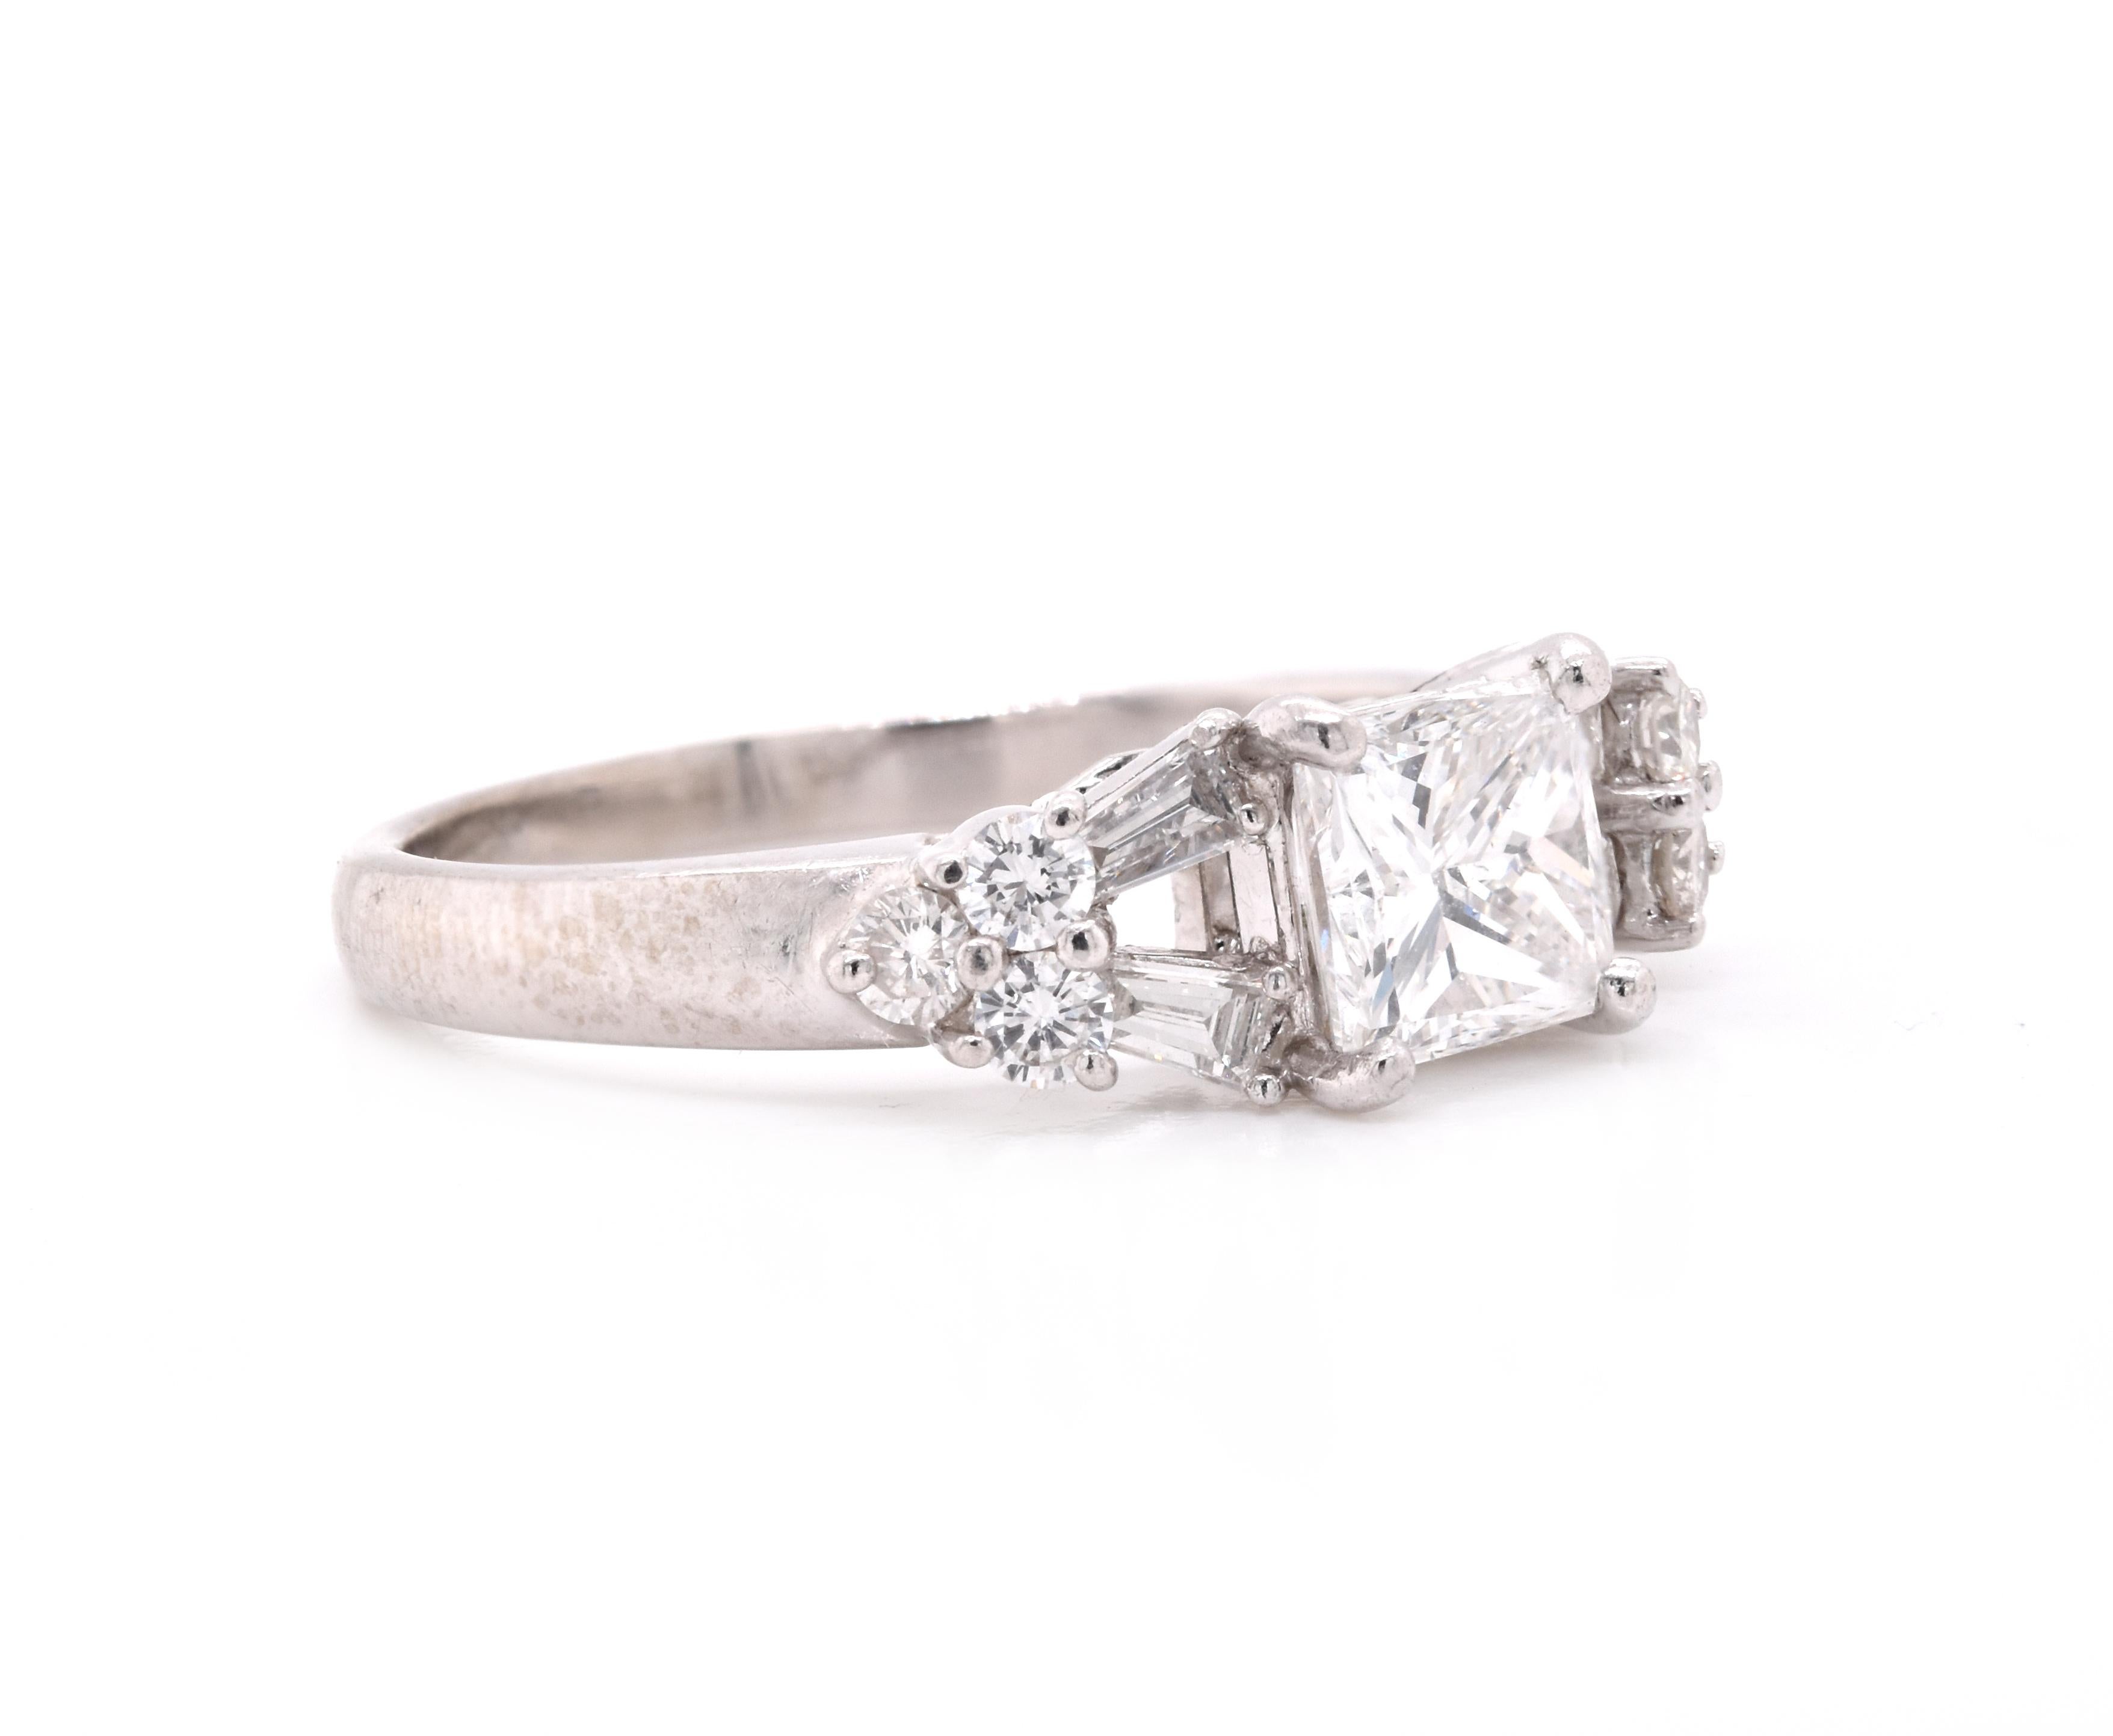 Material: Platinum
Center Diamond: 1 princess cut = 1.05ct
Color: E
Clarity: VS1
Diamonds: 10 round/baguette cut = .46cttw
Color: G
Clarity:  VS
Ring Size: 7 (please allow up to 2 additional business days for sizing requests)
Dimensions: ring shank